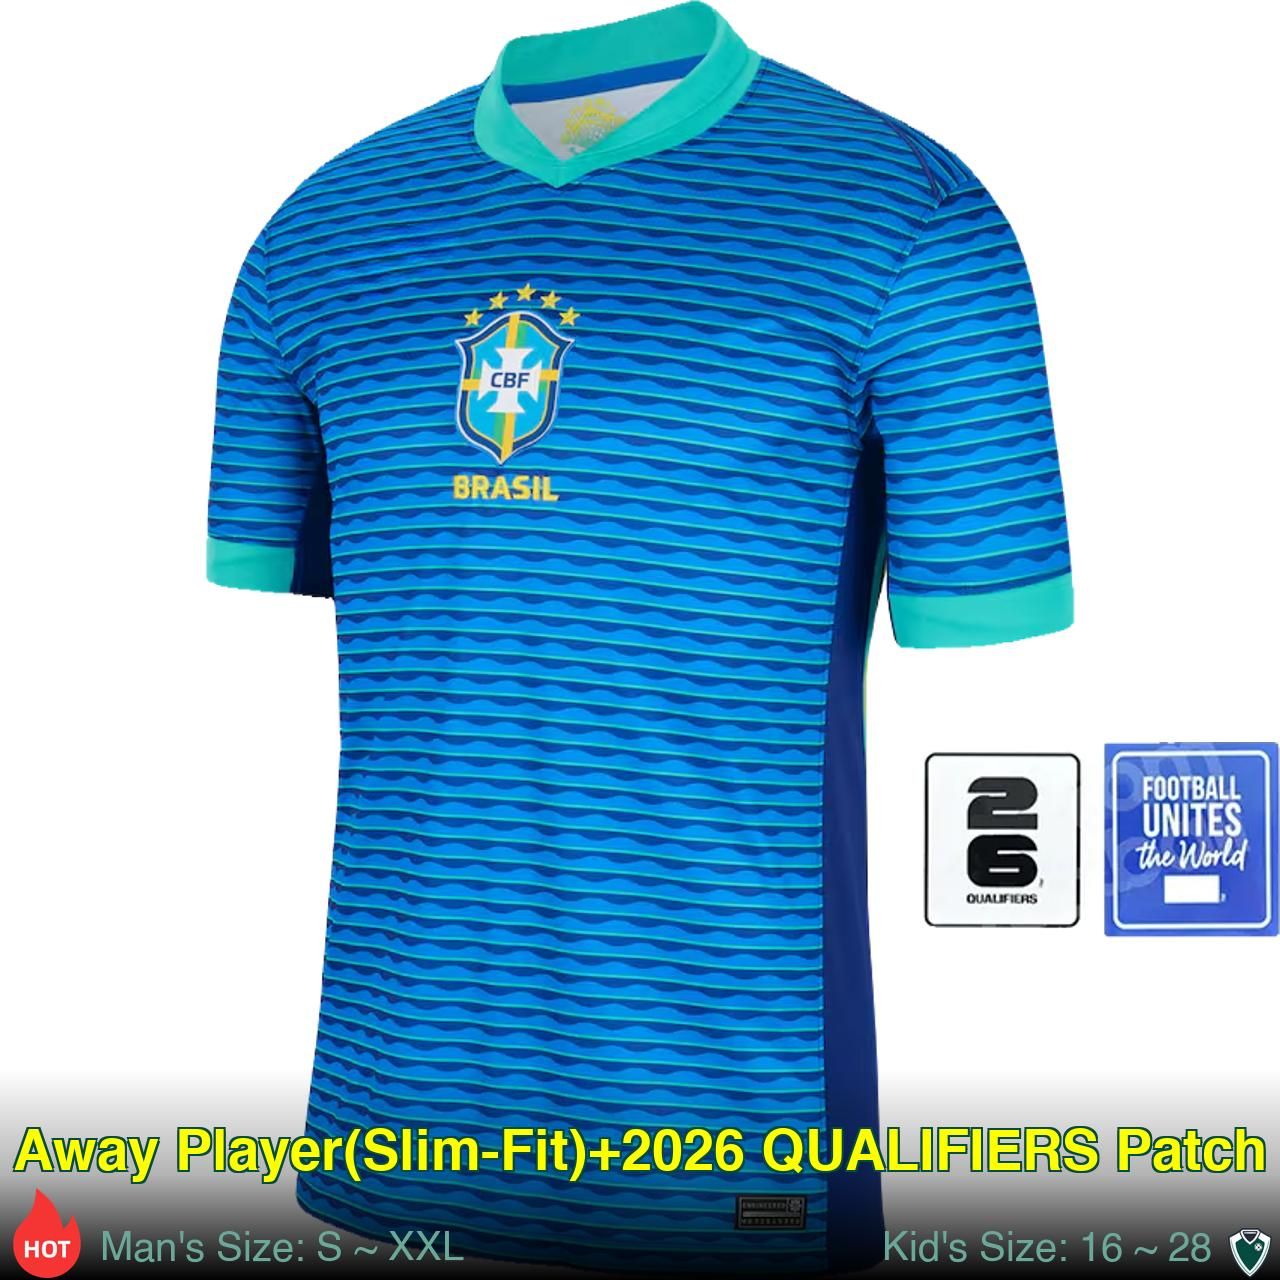 Away Player+2026 QUALIFIERS Patch